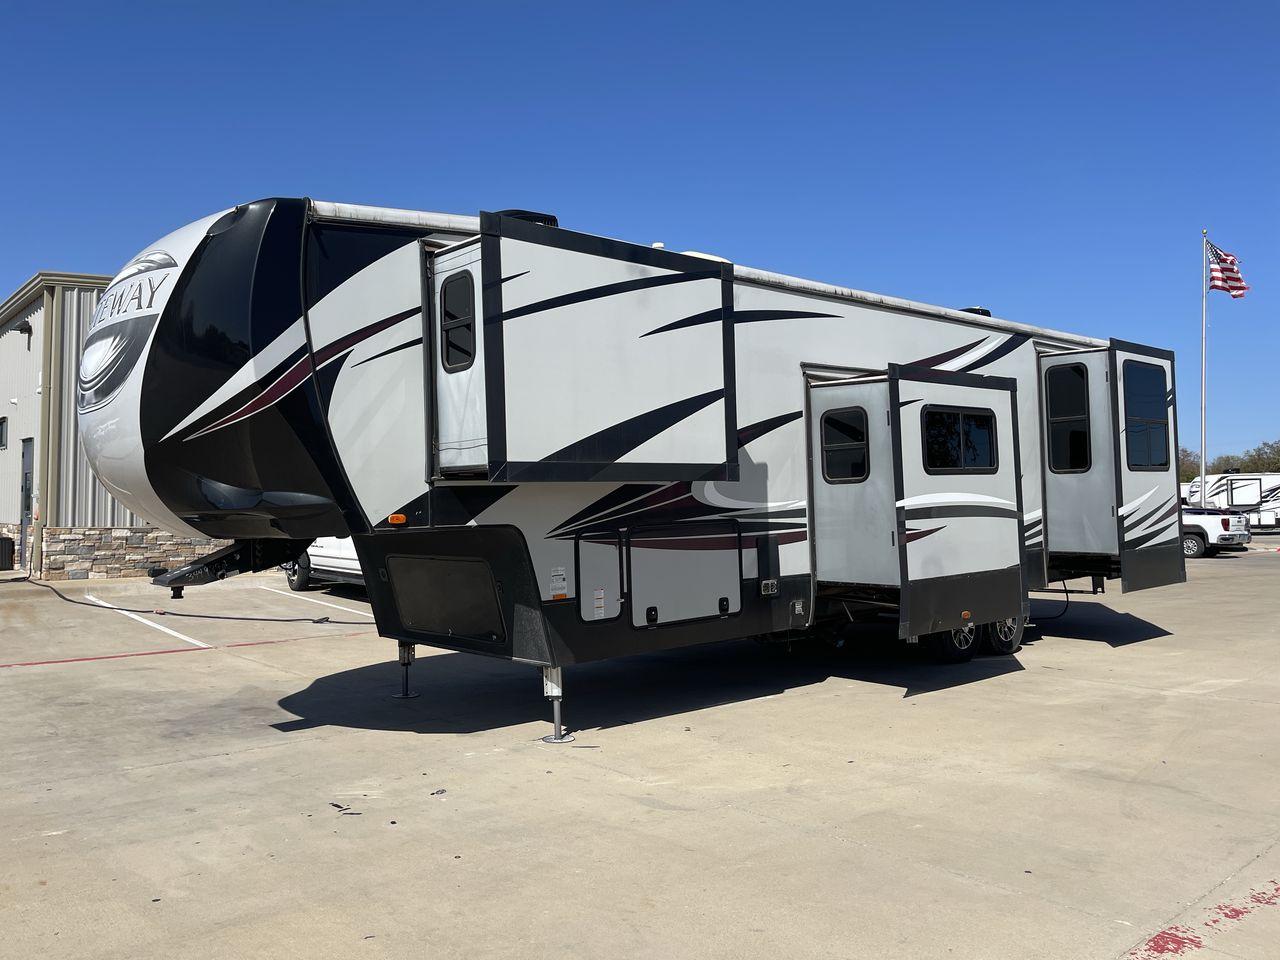 2017 TAN GATEWAY 3712RDMB - (5SFSG4228HE) , Length: 39.5 ft. | Dry Weight: 13,680 lbs. | Gross Weight: 15,500 lbs. | Slides: 4 transmission, located at 4319 N Main Street, Cleburne, TX, 76033, (817) 221-0660, 32.435829, -97.384178 - Explore more reasons that emphasize the benefits of having this RV as your own. (1) It has Two TVs for entertainment in both the living area and the master bedroom. (2) It has Outside speakers bring the music outdoors for alfresco enjoyment. (3) It has a sleek and durable solid surface counter - Photo #23